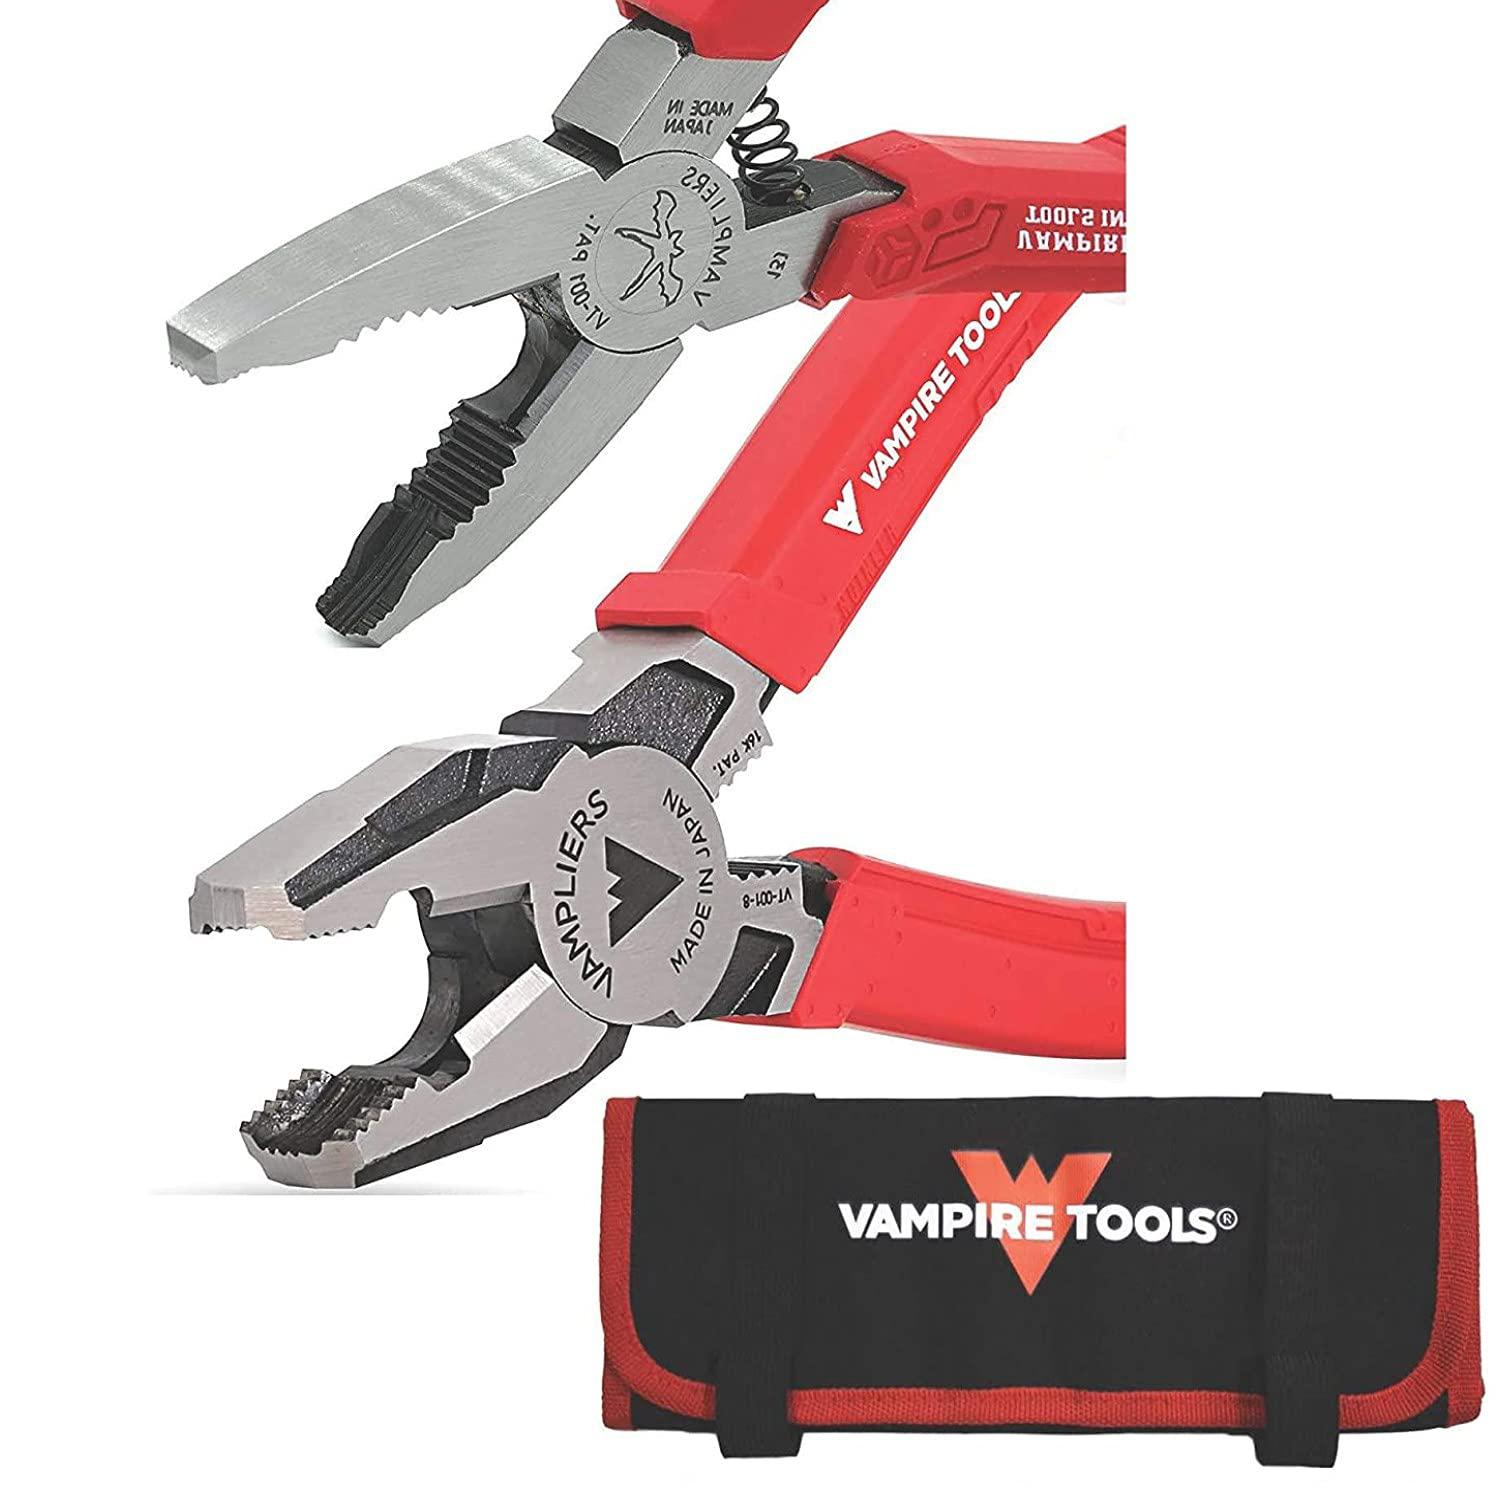 vampliers! world's best pliers set, screw extraction pliers makes the best gift best pliers ever for damage/rusted/corroded/s